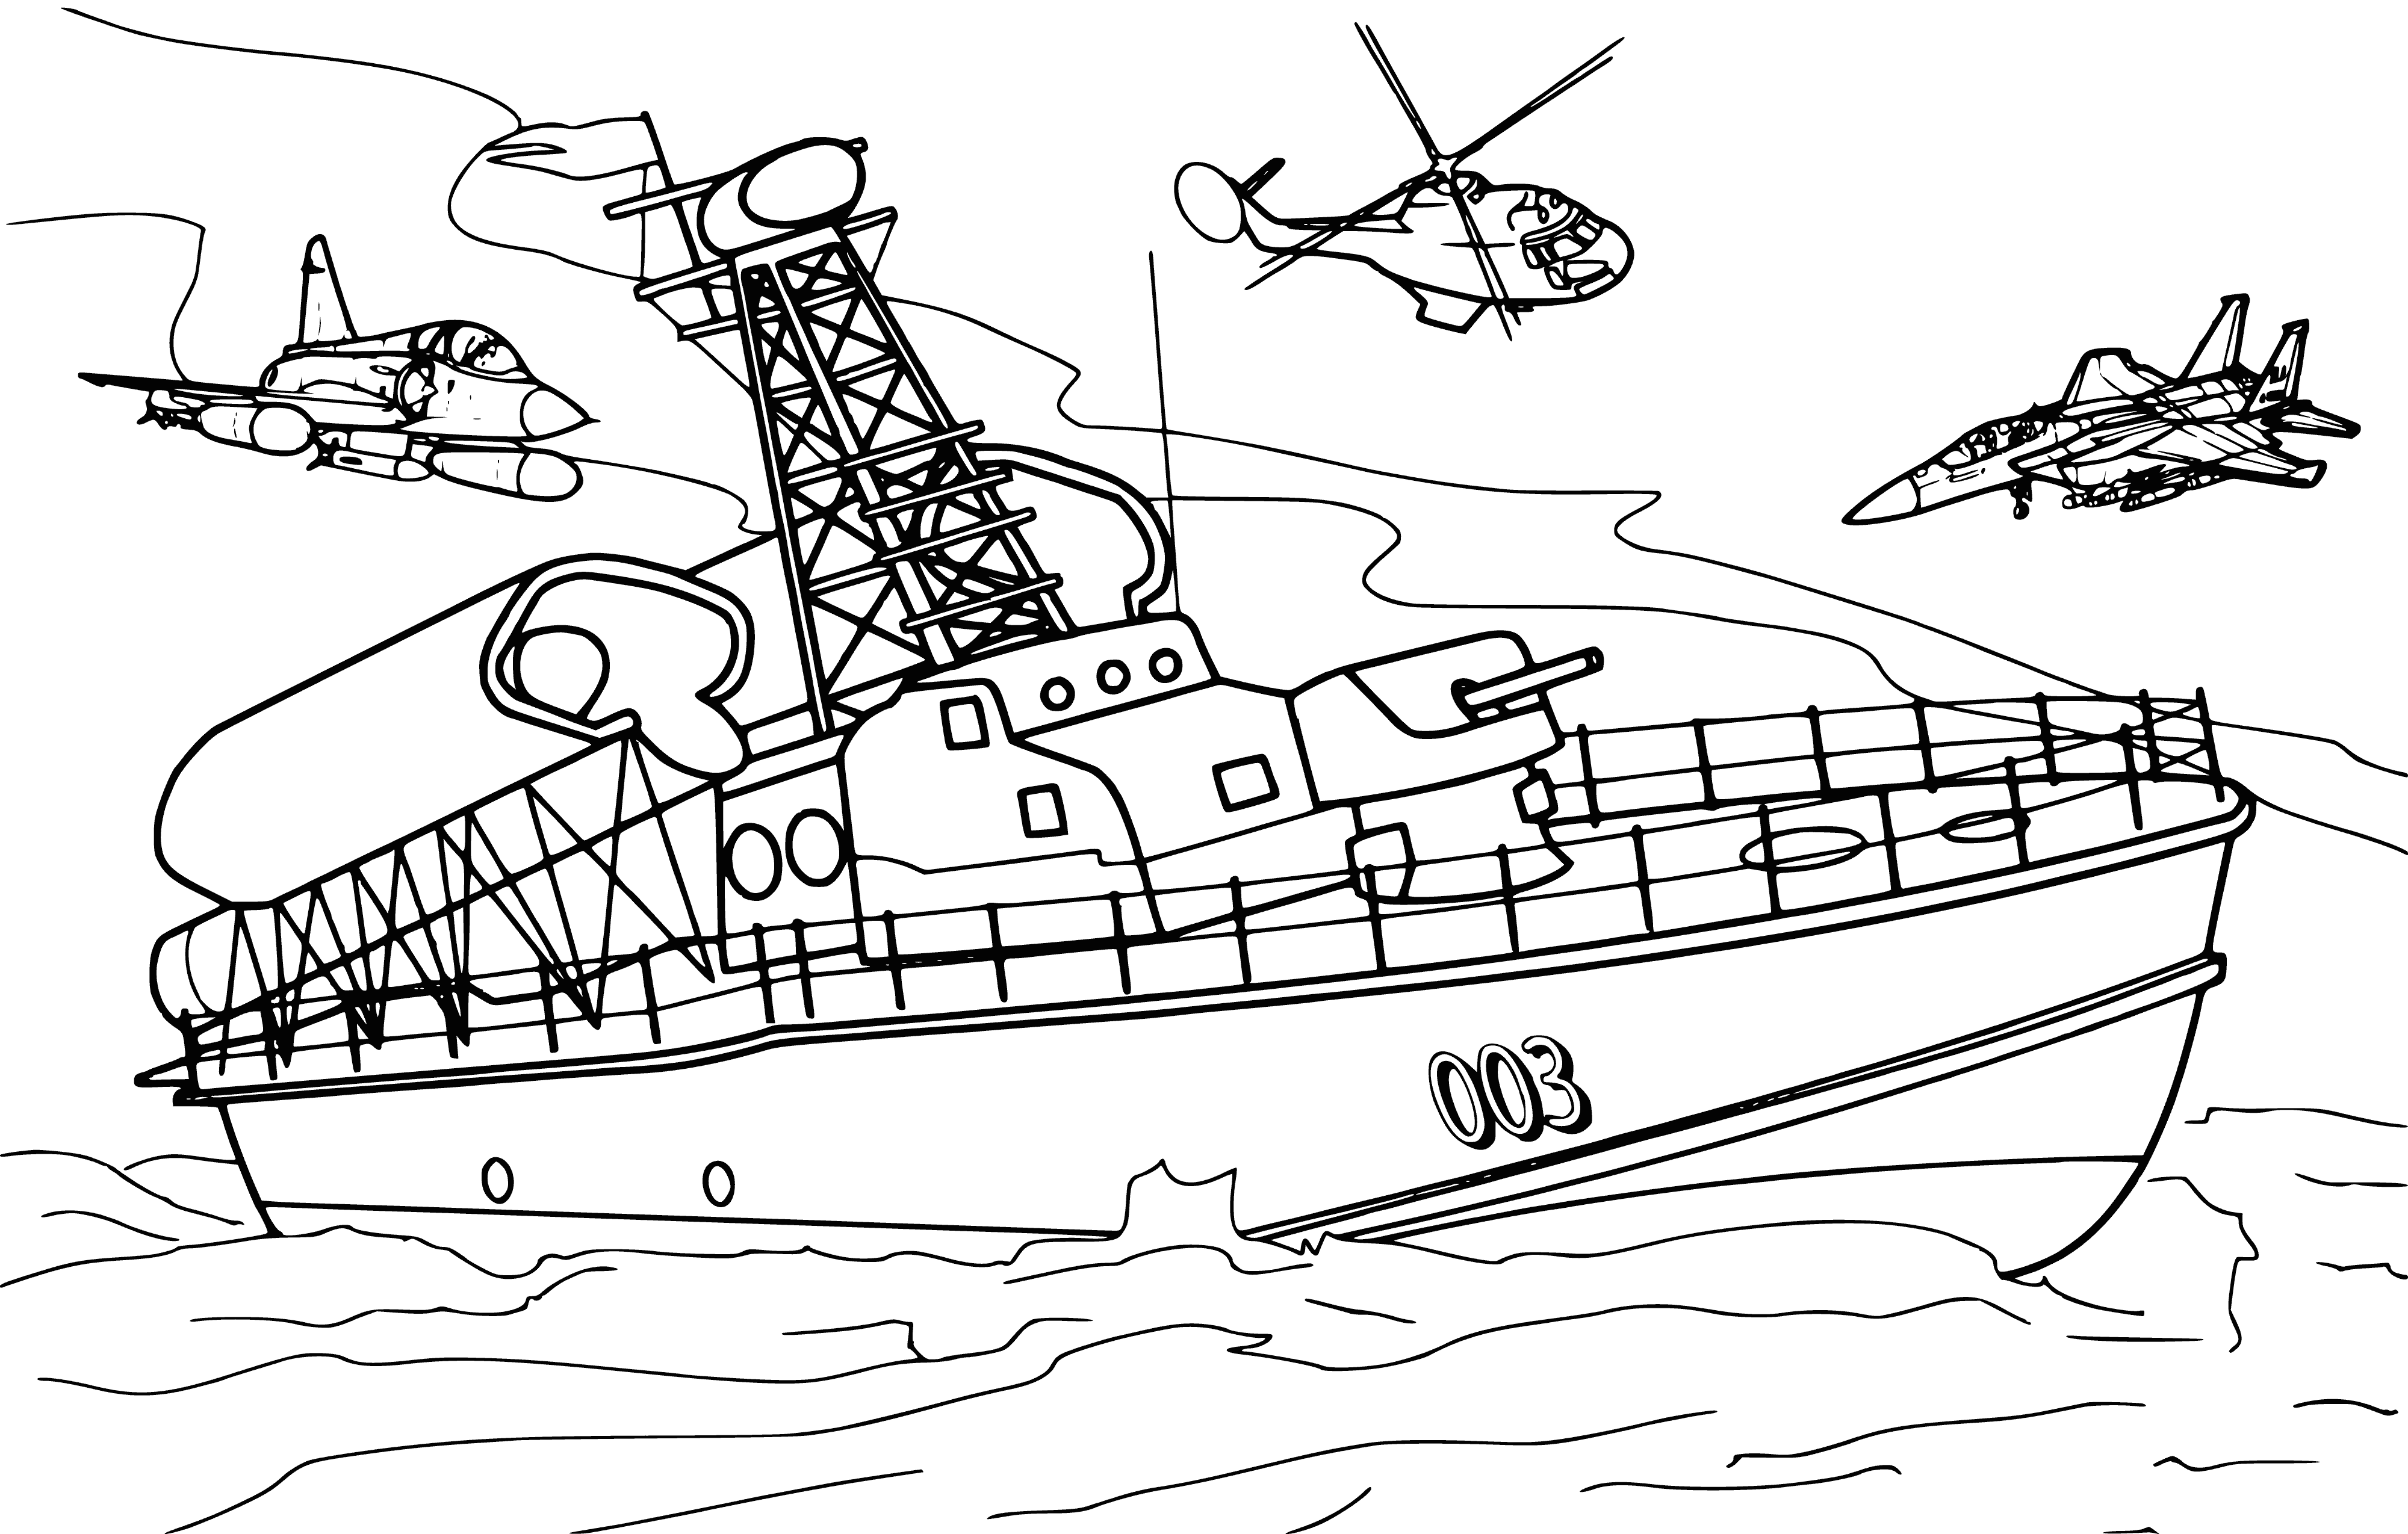 coloring page: 5 boats in water, 1 large w/ 2 sails, 4 small w/ 1 sail each. All have colors to fill in.